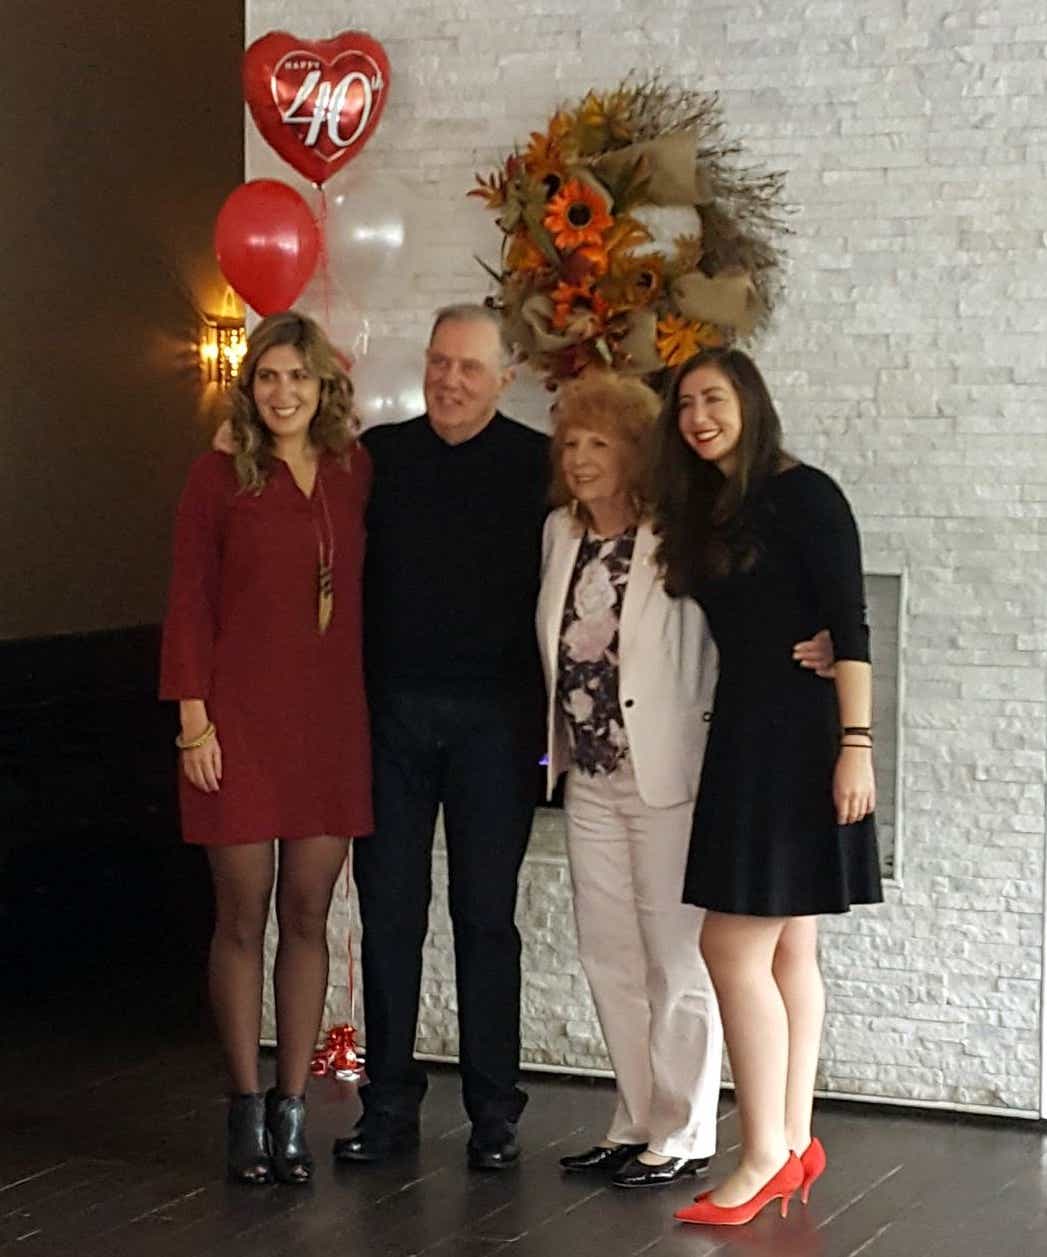 Lawrence Caruso poses and his wife and two daughters with a 40th anniversary balloon behind them